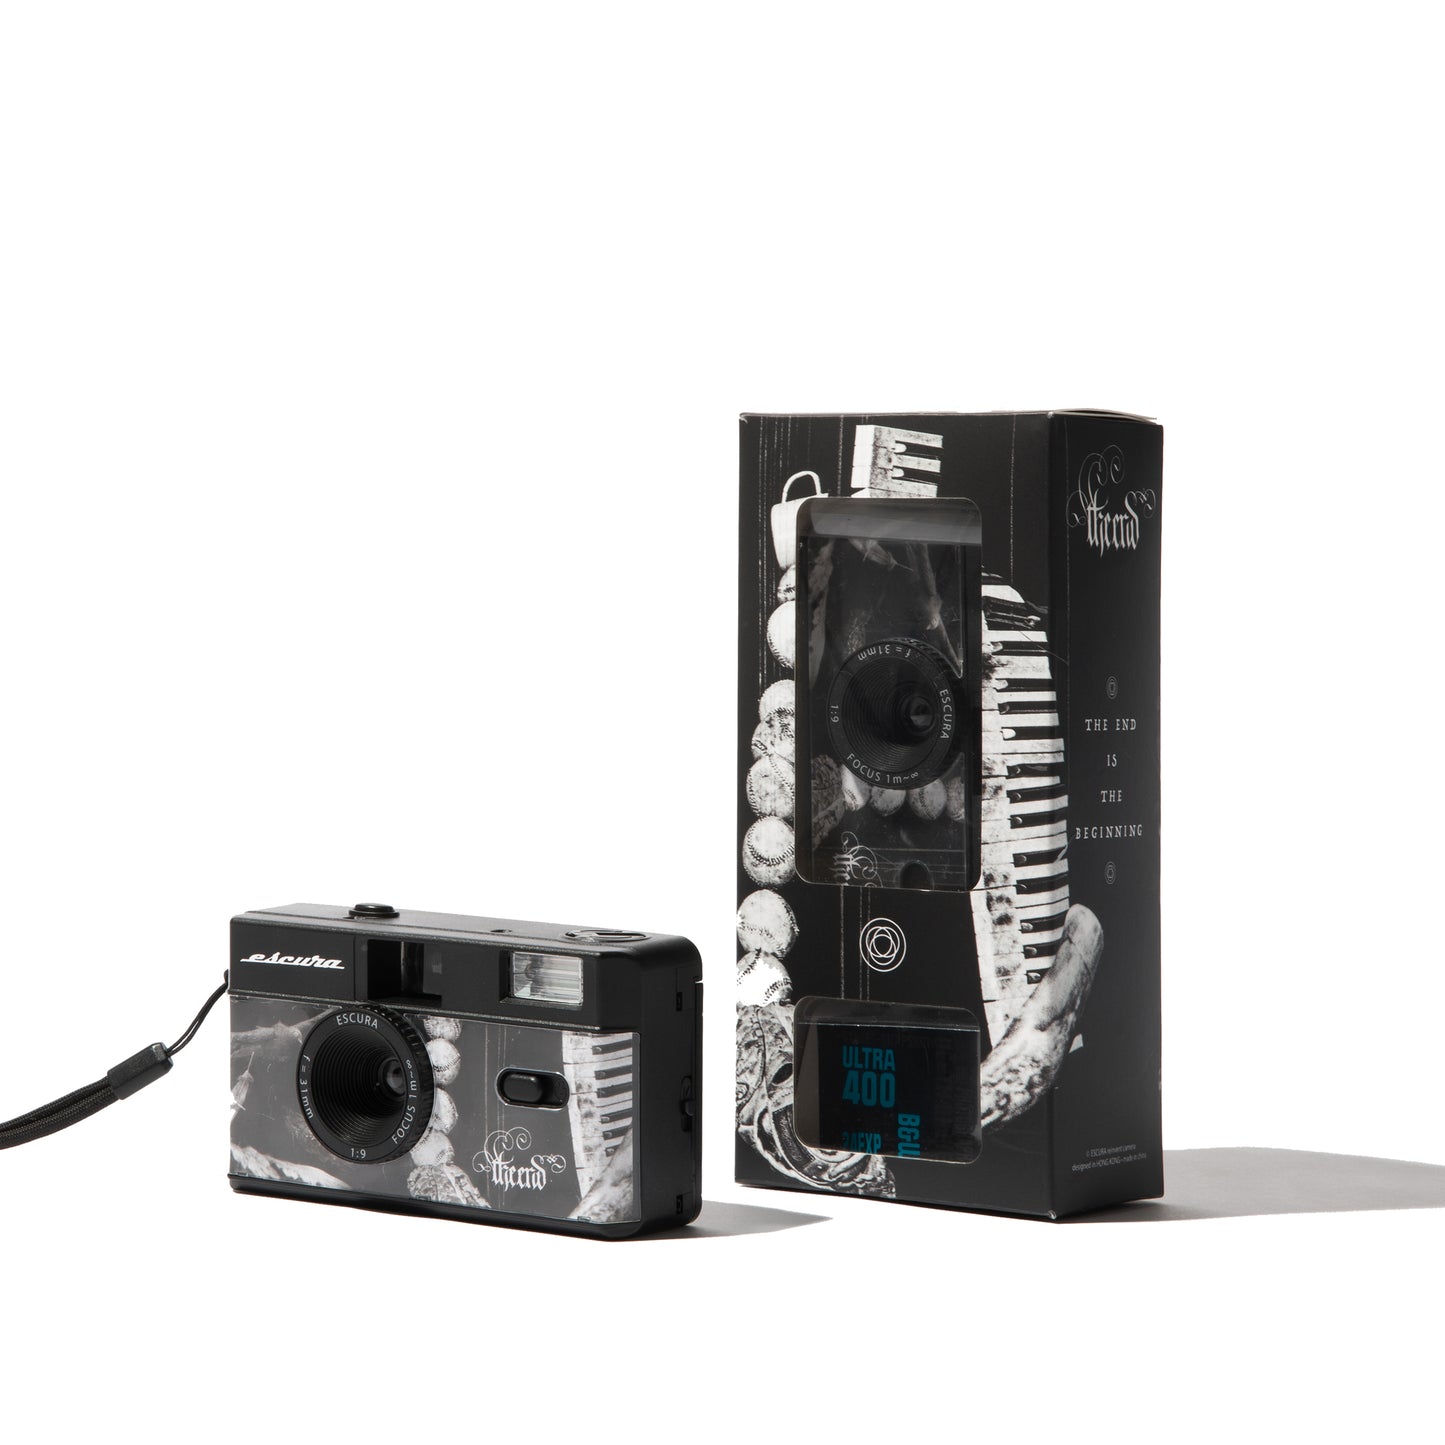 THE END Themed Re-useable Film Camera